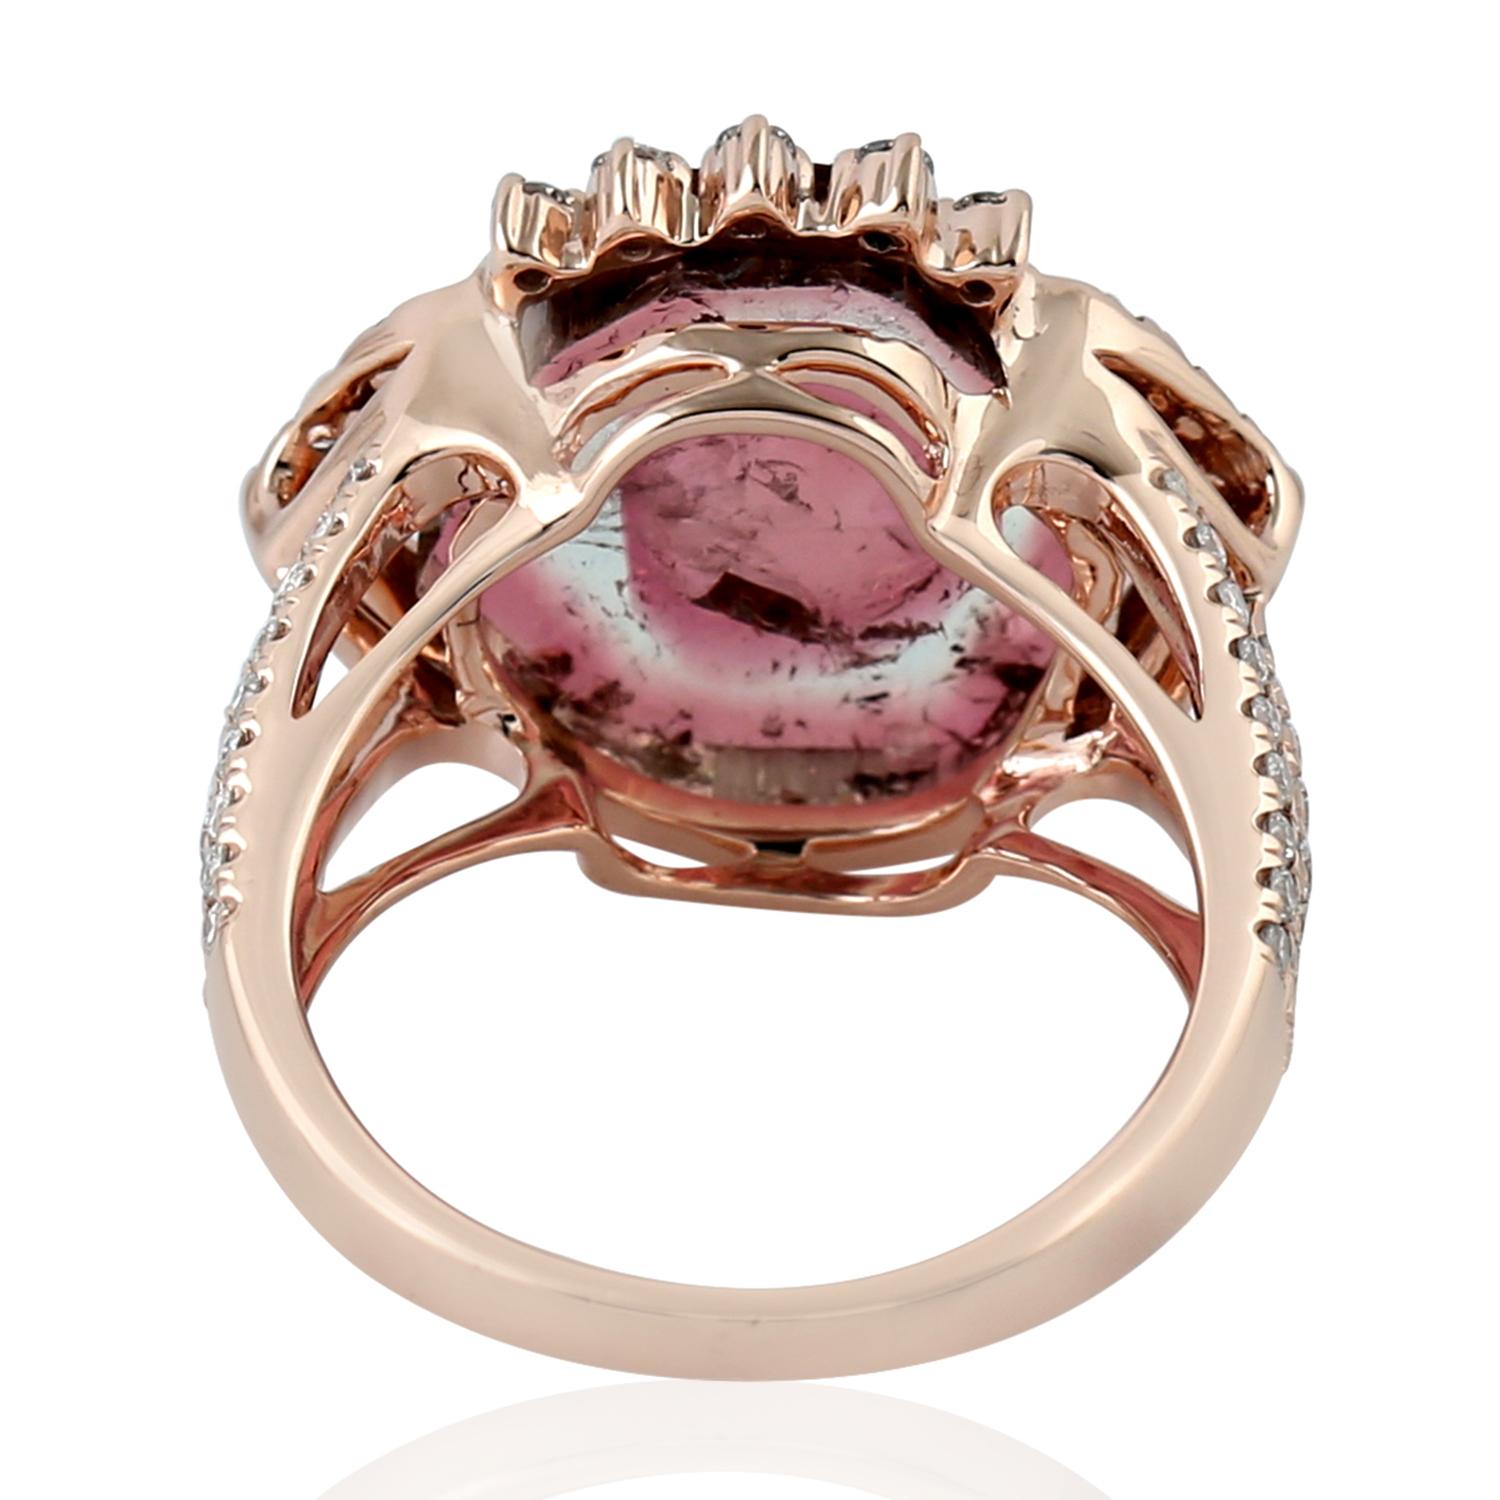 Mixed Cut Watermelon Tourmaline Stone Cocktail Ring with Pave Diamond Made in 18k Gold For Sale